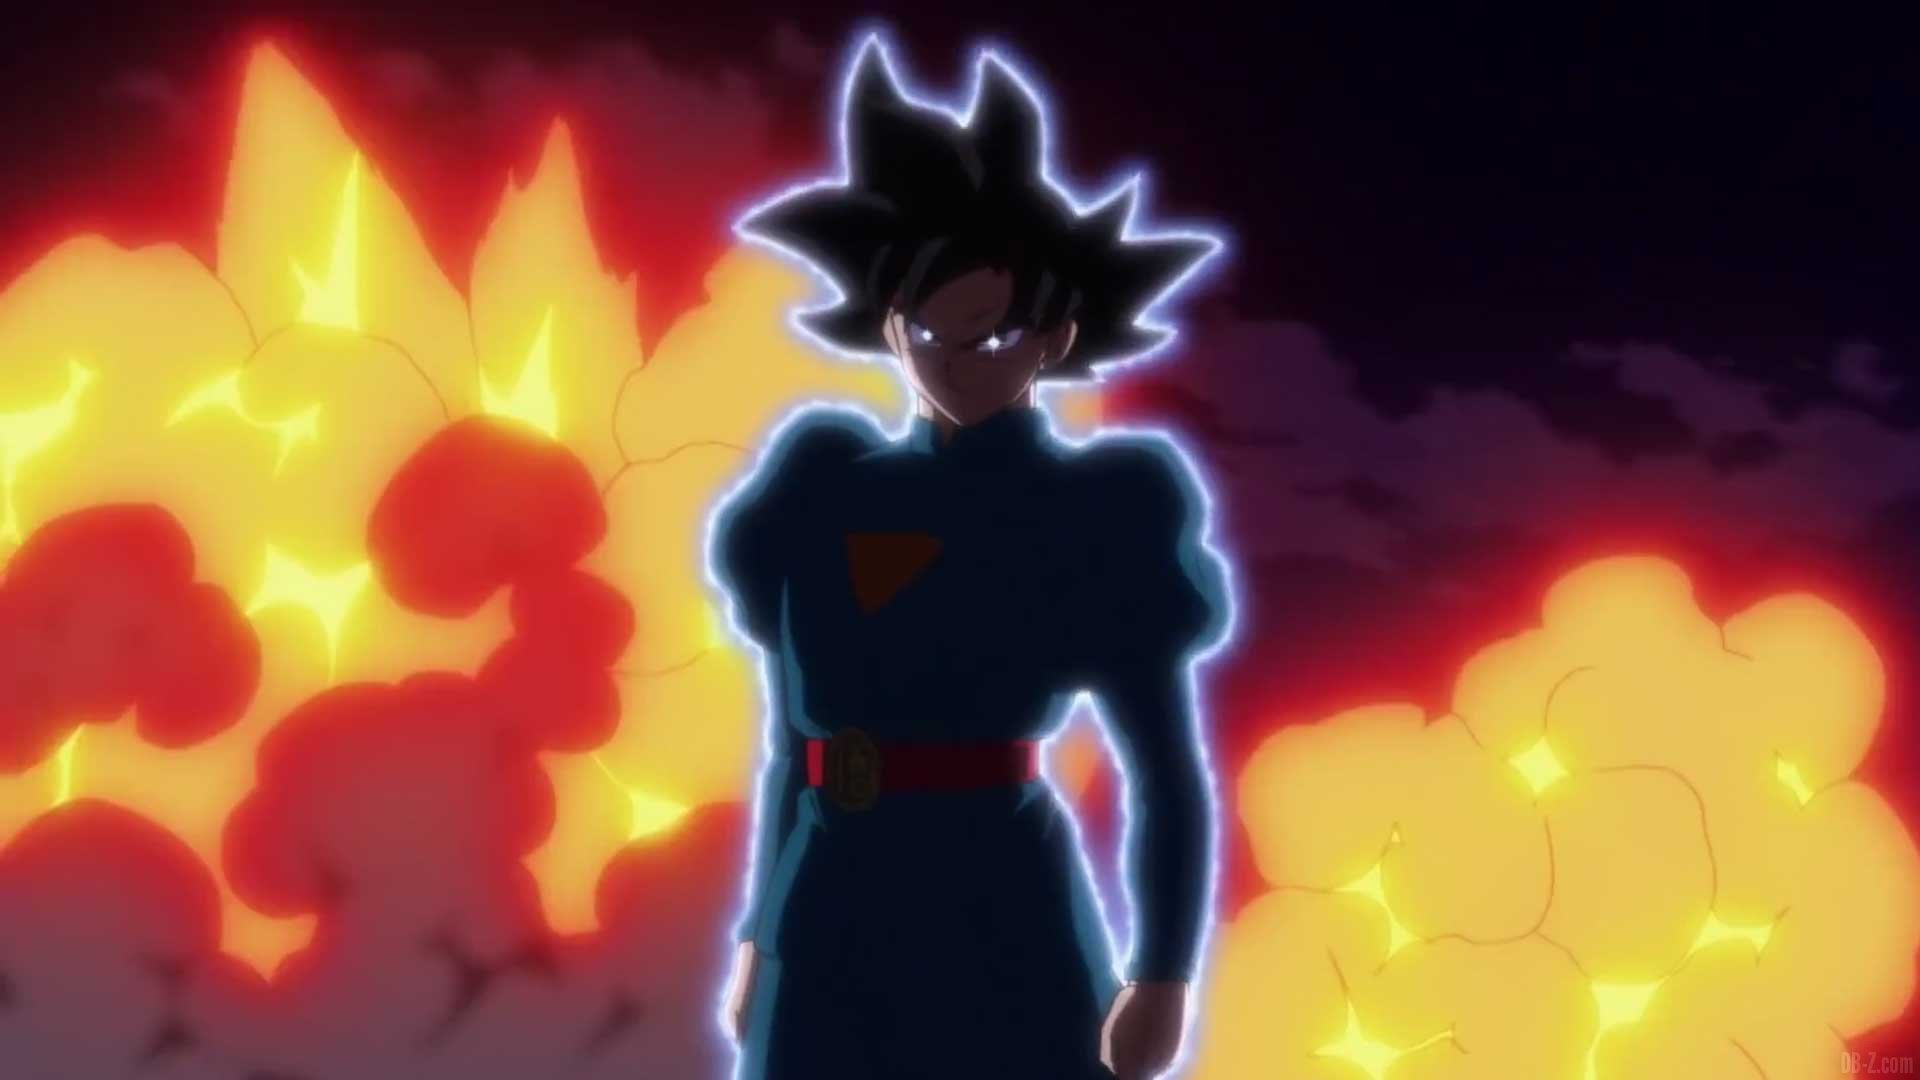 Super Dragon Ball Heroes Episode 10 Date & Synopsis